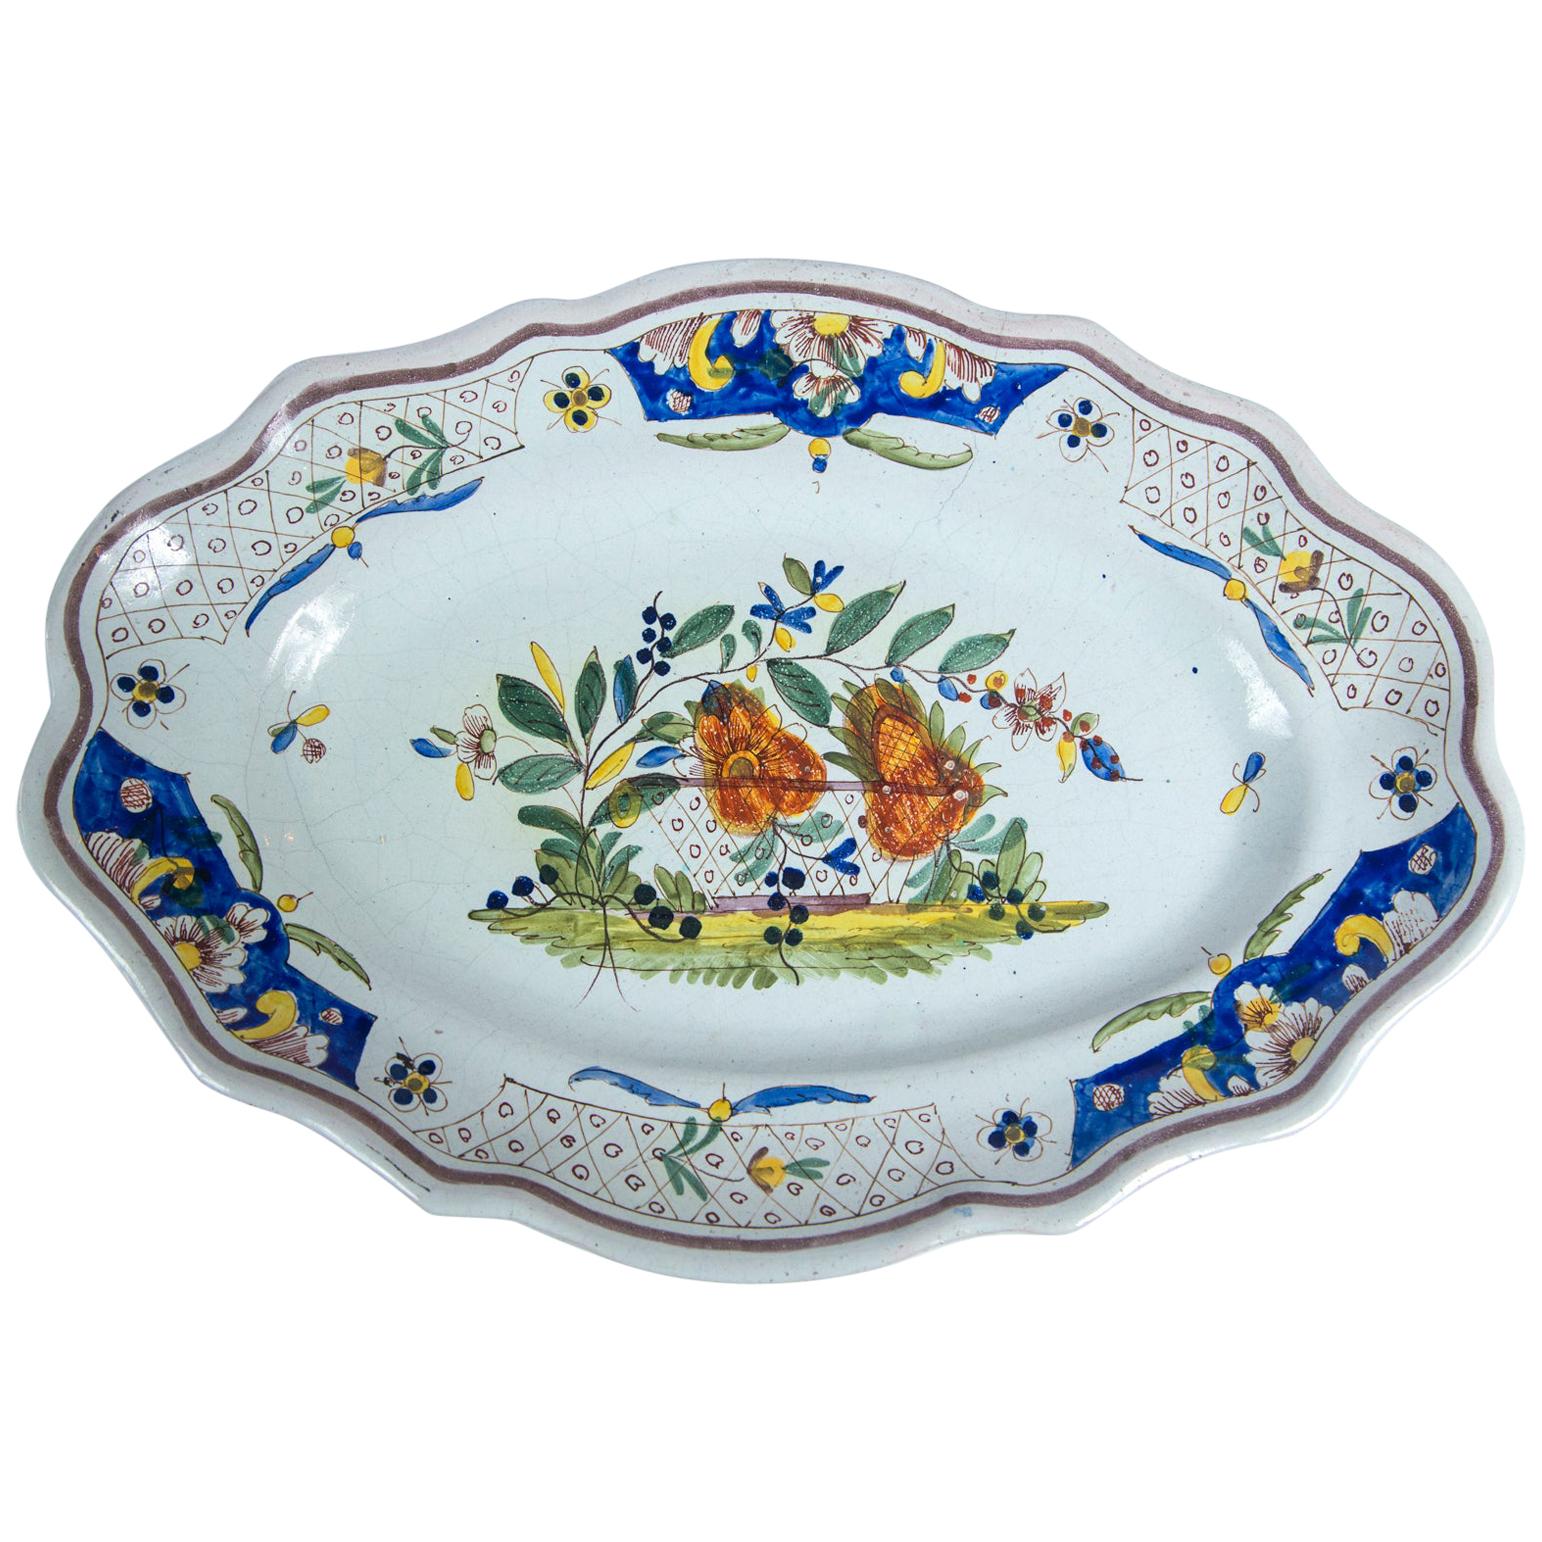 Hand Painted French Faience Platter, Early 19th Century